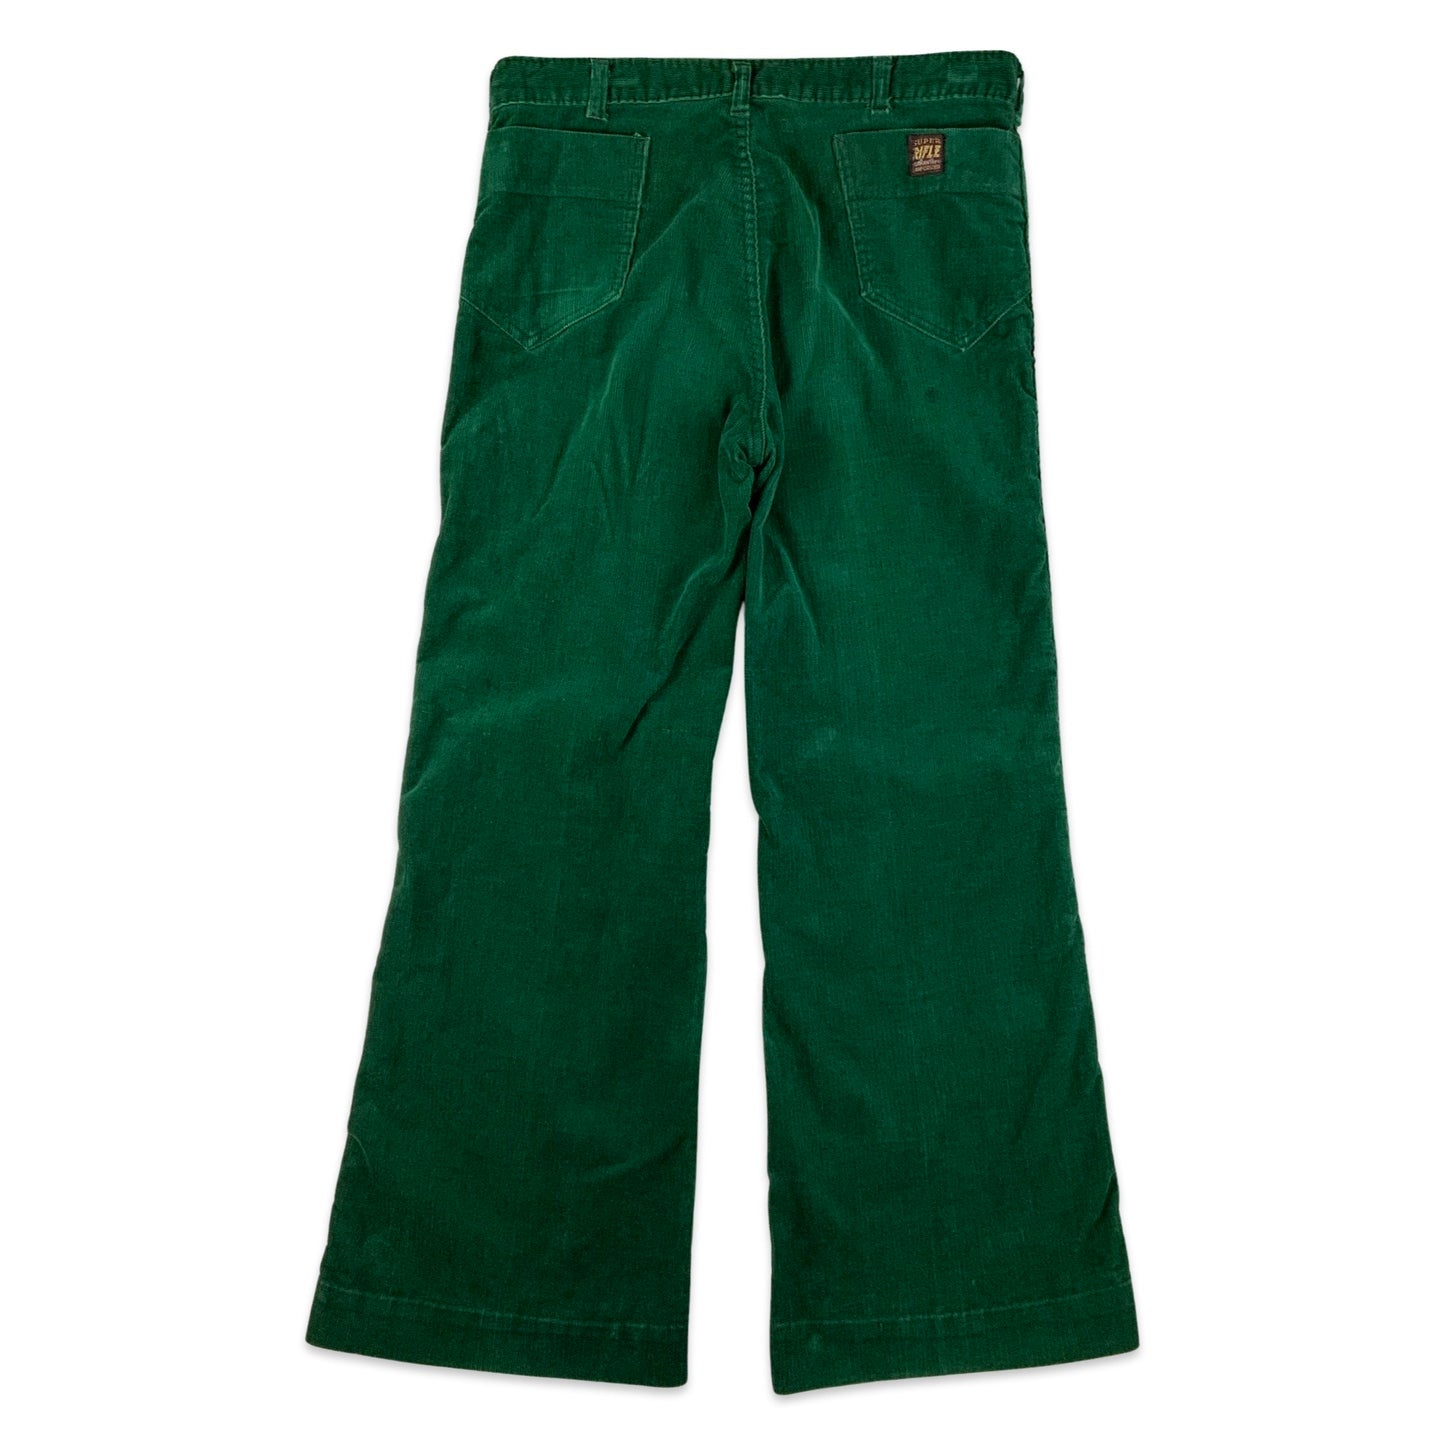 Vintage Green Flared Corduroy Trousers 33W 30L